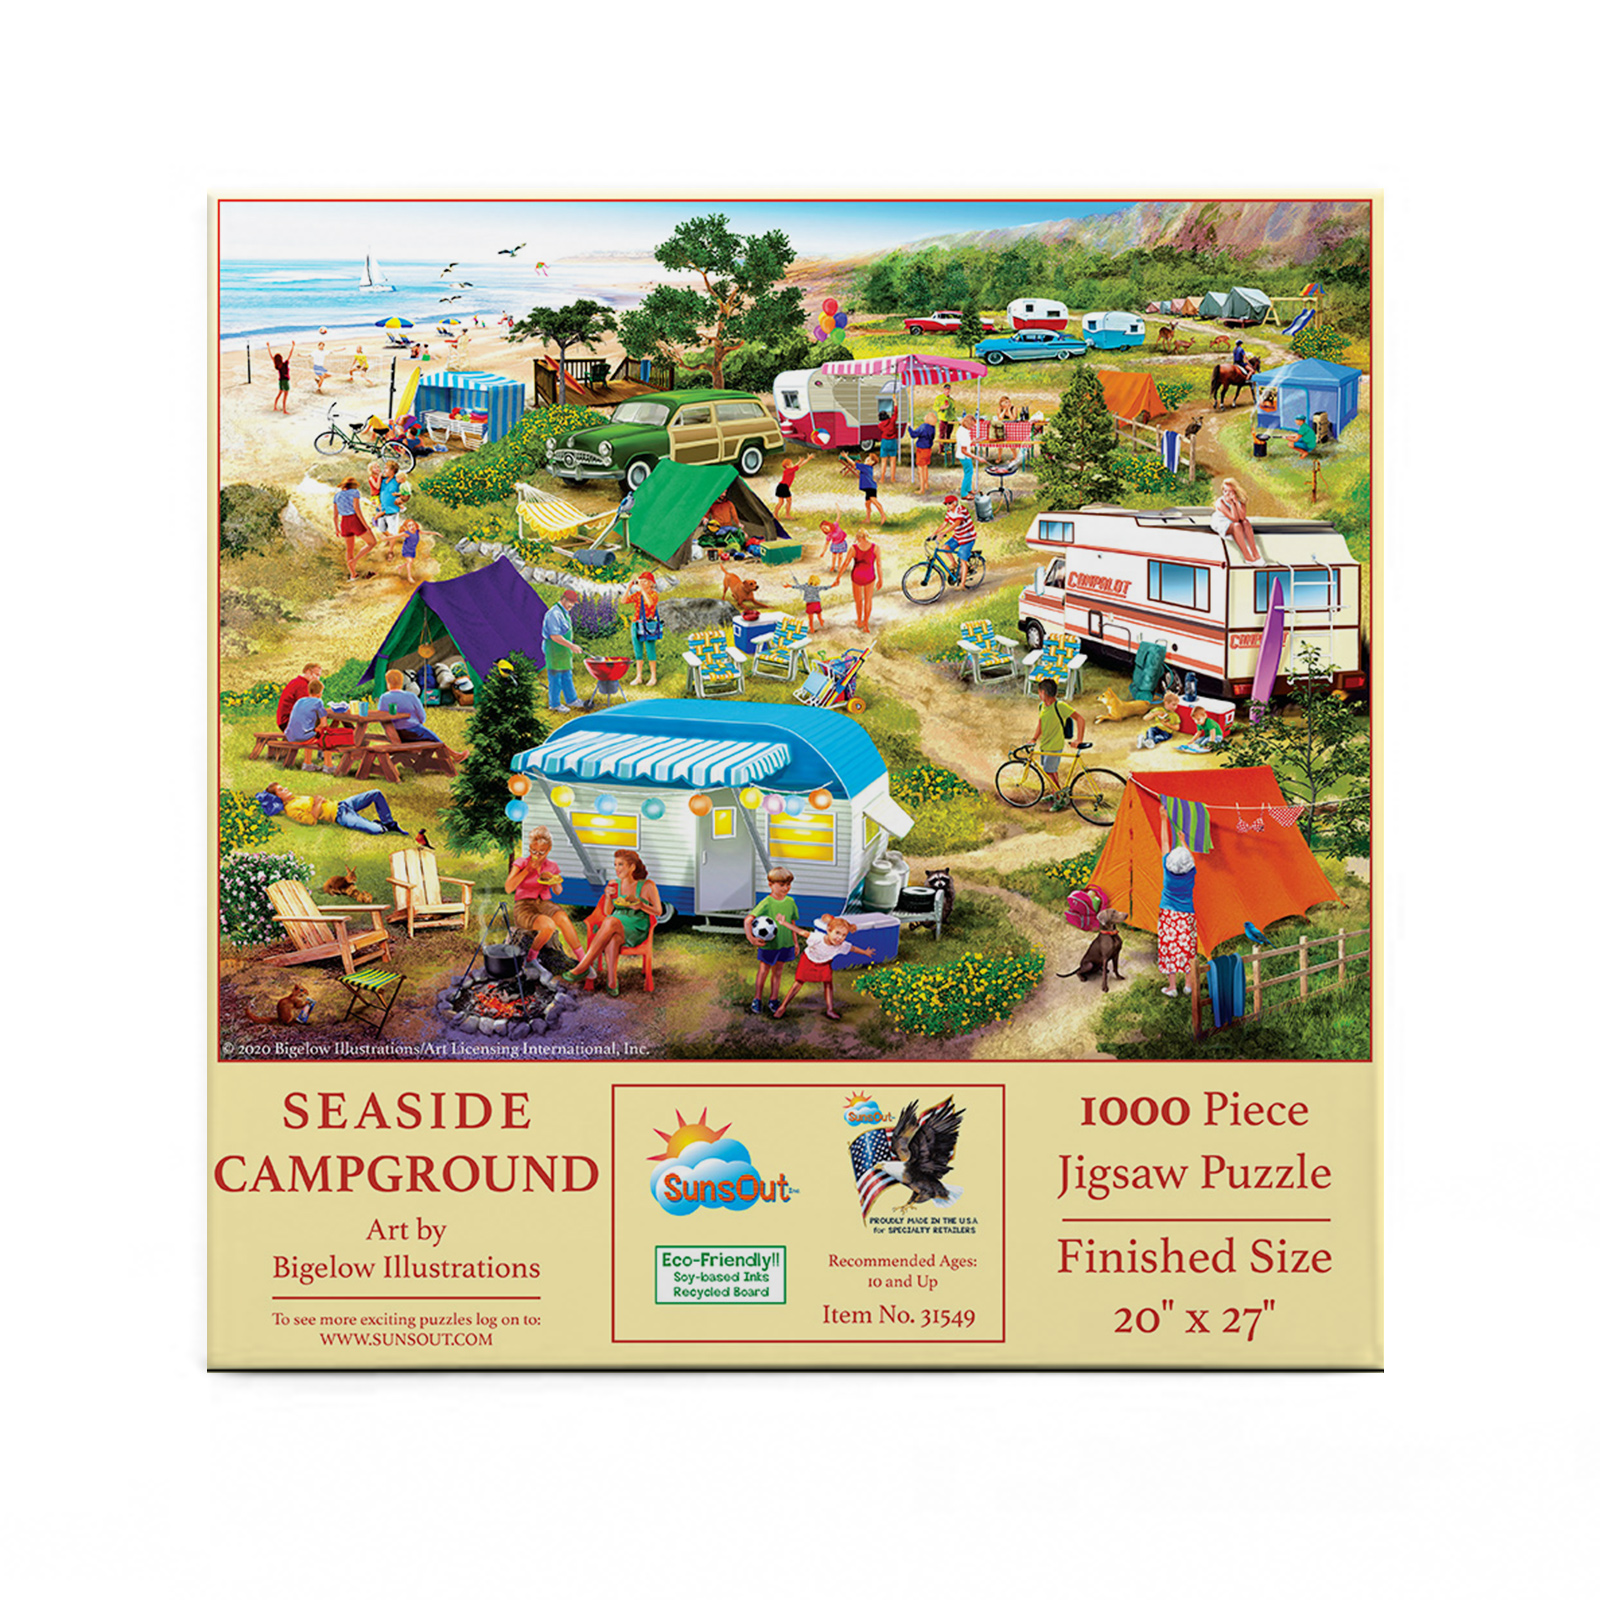 Seaside Campground